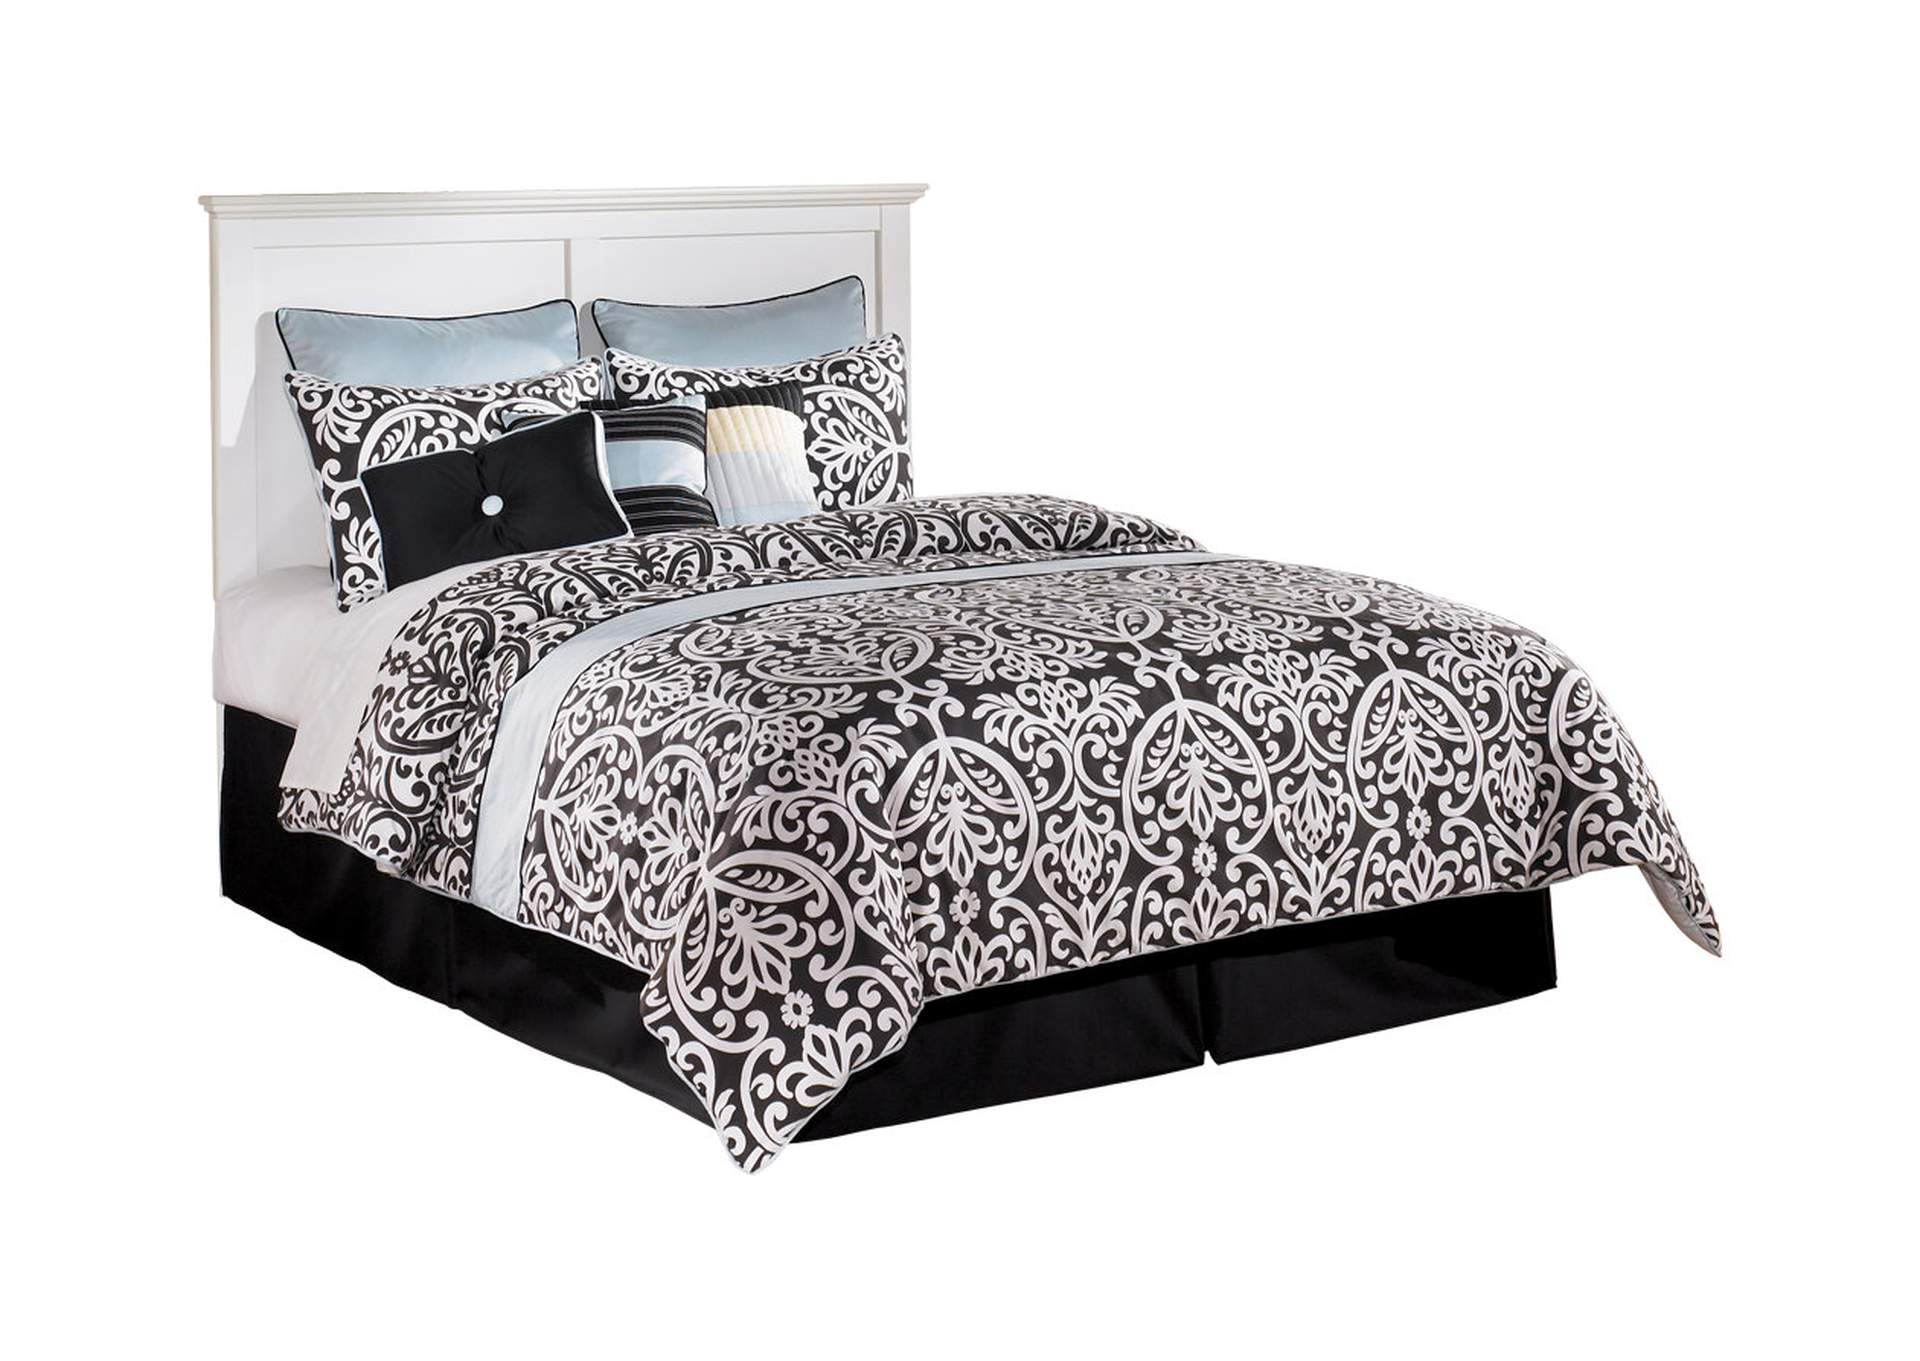 Bostwick Shoals Queen Panel Bed, Dresser, Mirror and 2 Nightstands,Signature Design By Ashley